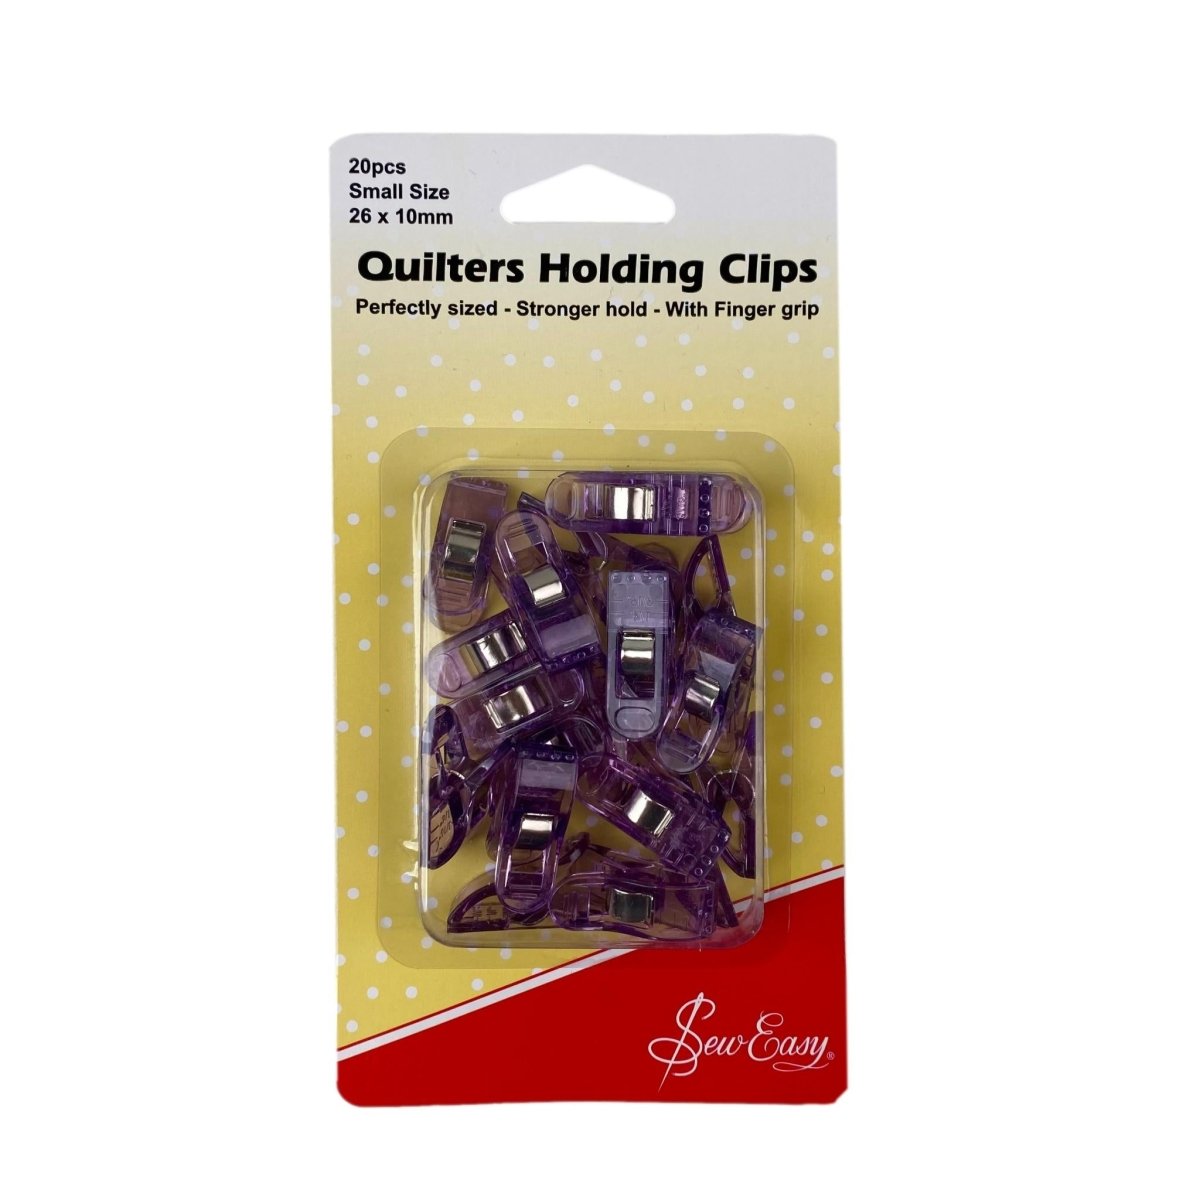 Sew Easy - Quilters Holding Clips Bulk Pack - Small - 45 pack or 20 pack - Sewing Gem